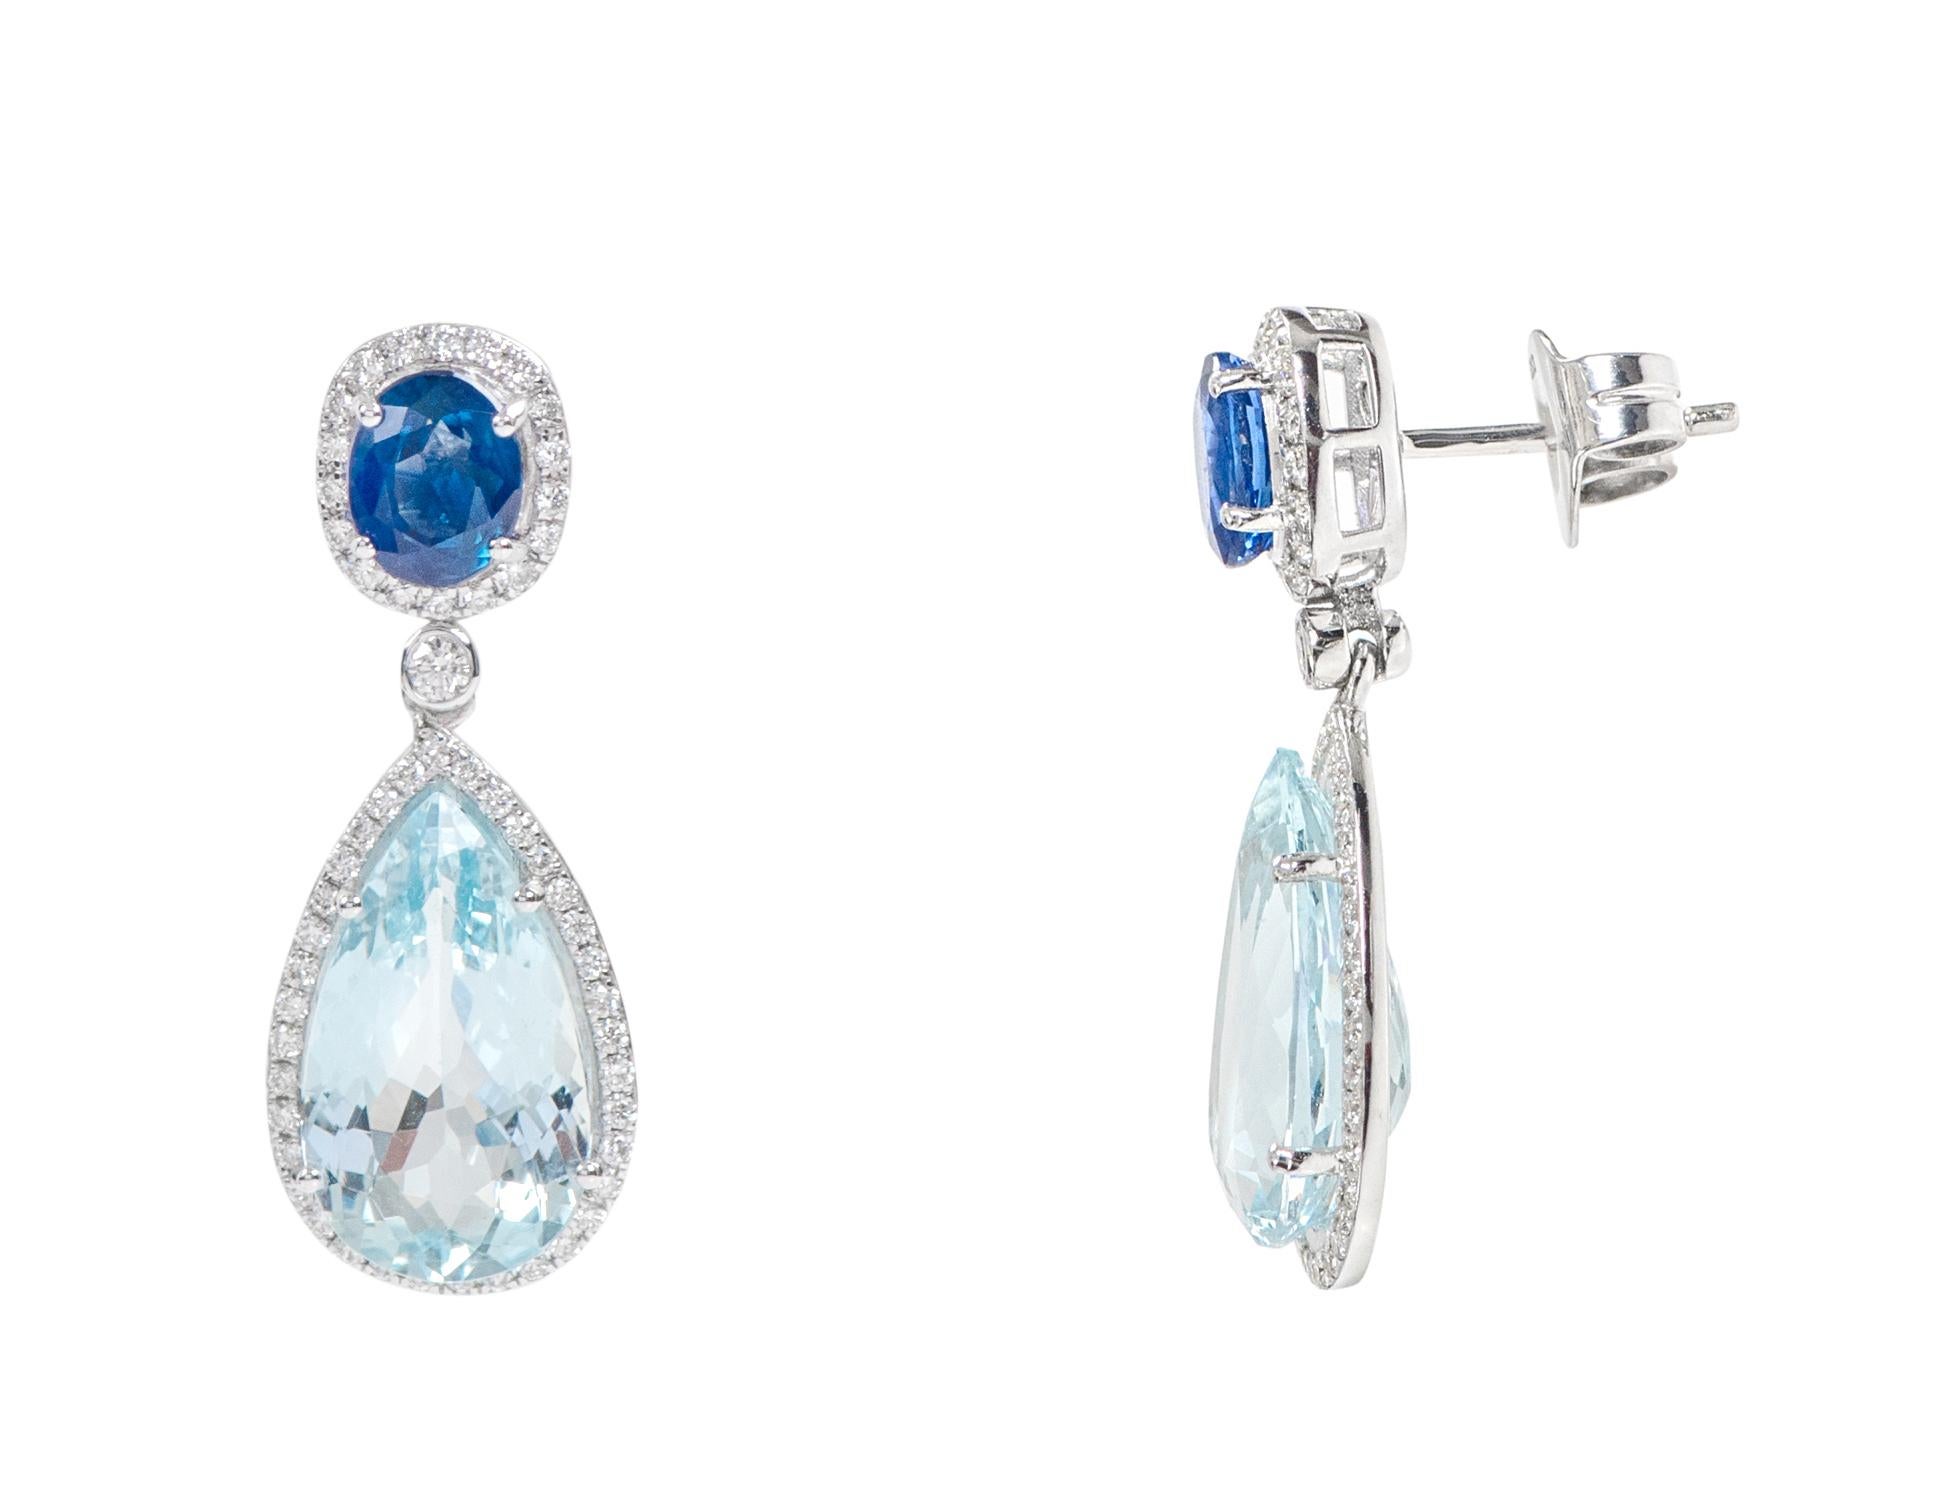 18 Karat White Gold Aquamarine, Blue Sapphire and Diamond Cocktail Drop Earrings

This impressive aqua sky aquamarine, azure blue, and diamond long hanging earring is glorious. The solitaire perfect pear shape aquamarine is surrounded by a single